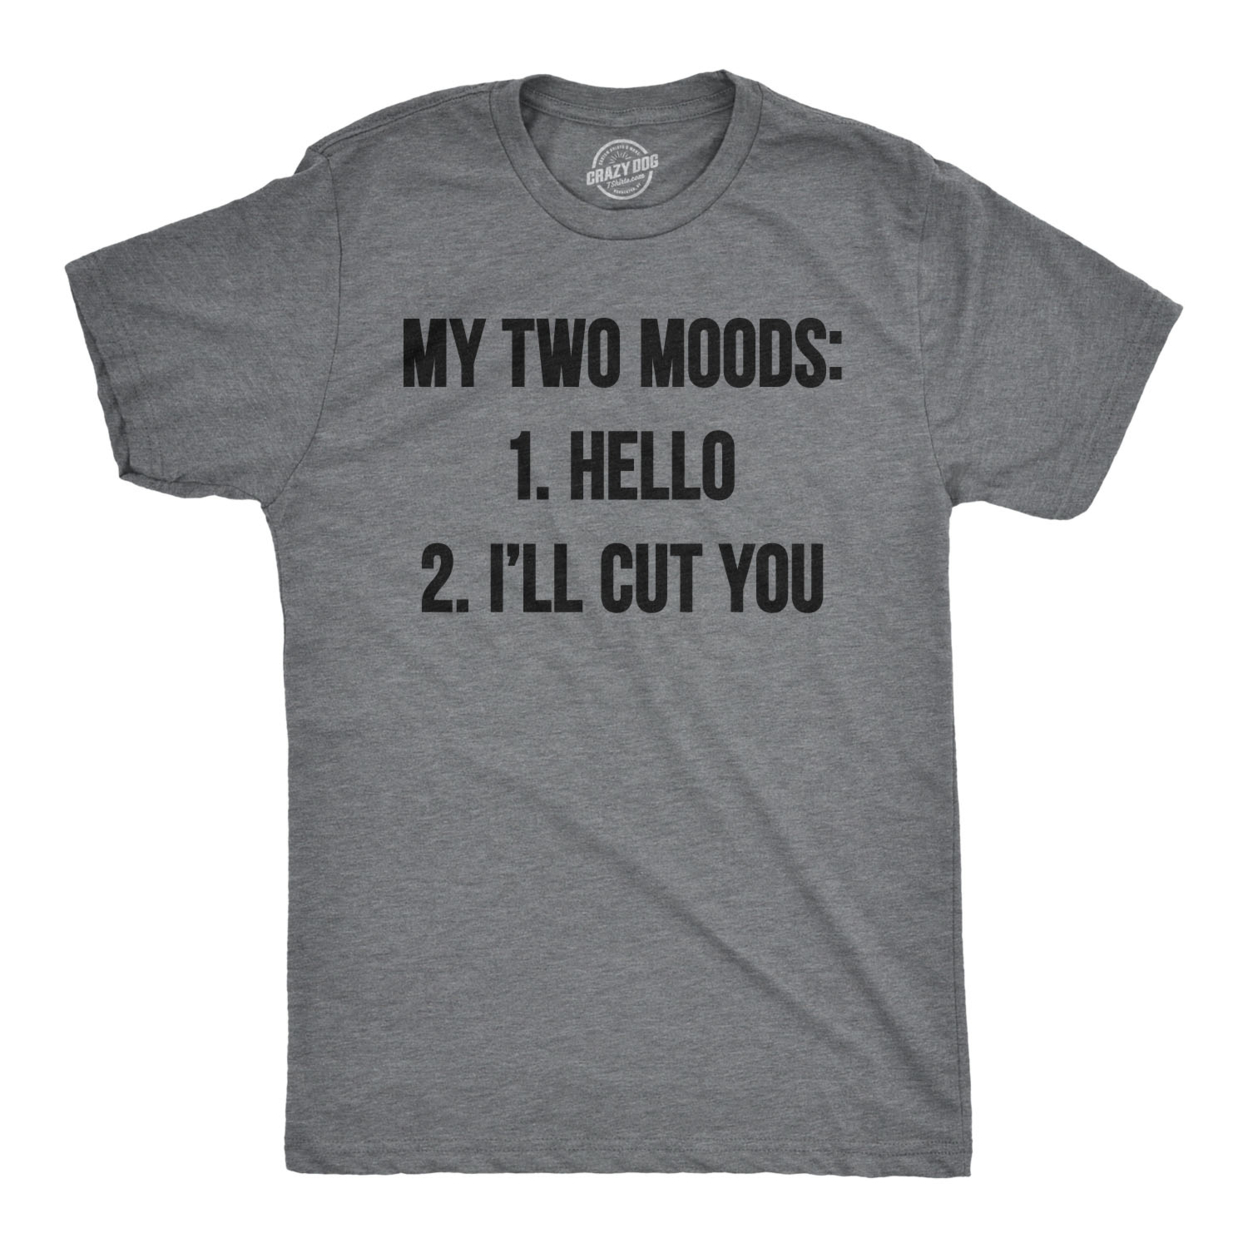 Mens My Two Moods Funny Tee Novelty Humor Shirts Cool Graphic Hilarious T Shirt in Blue | 3XL